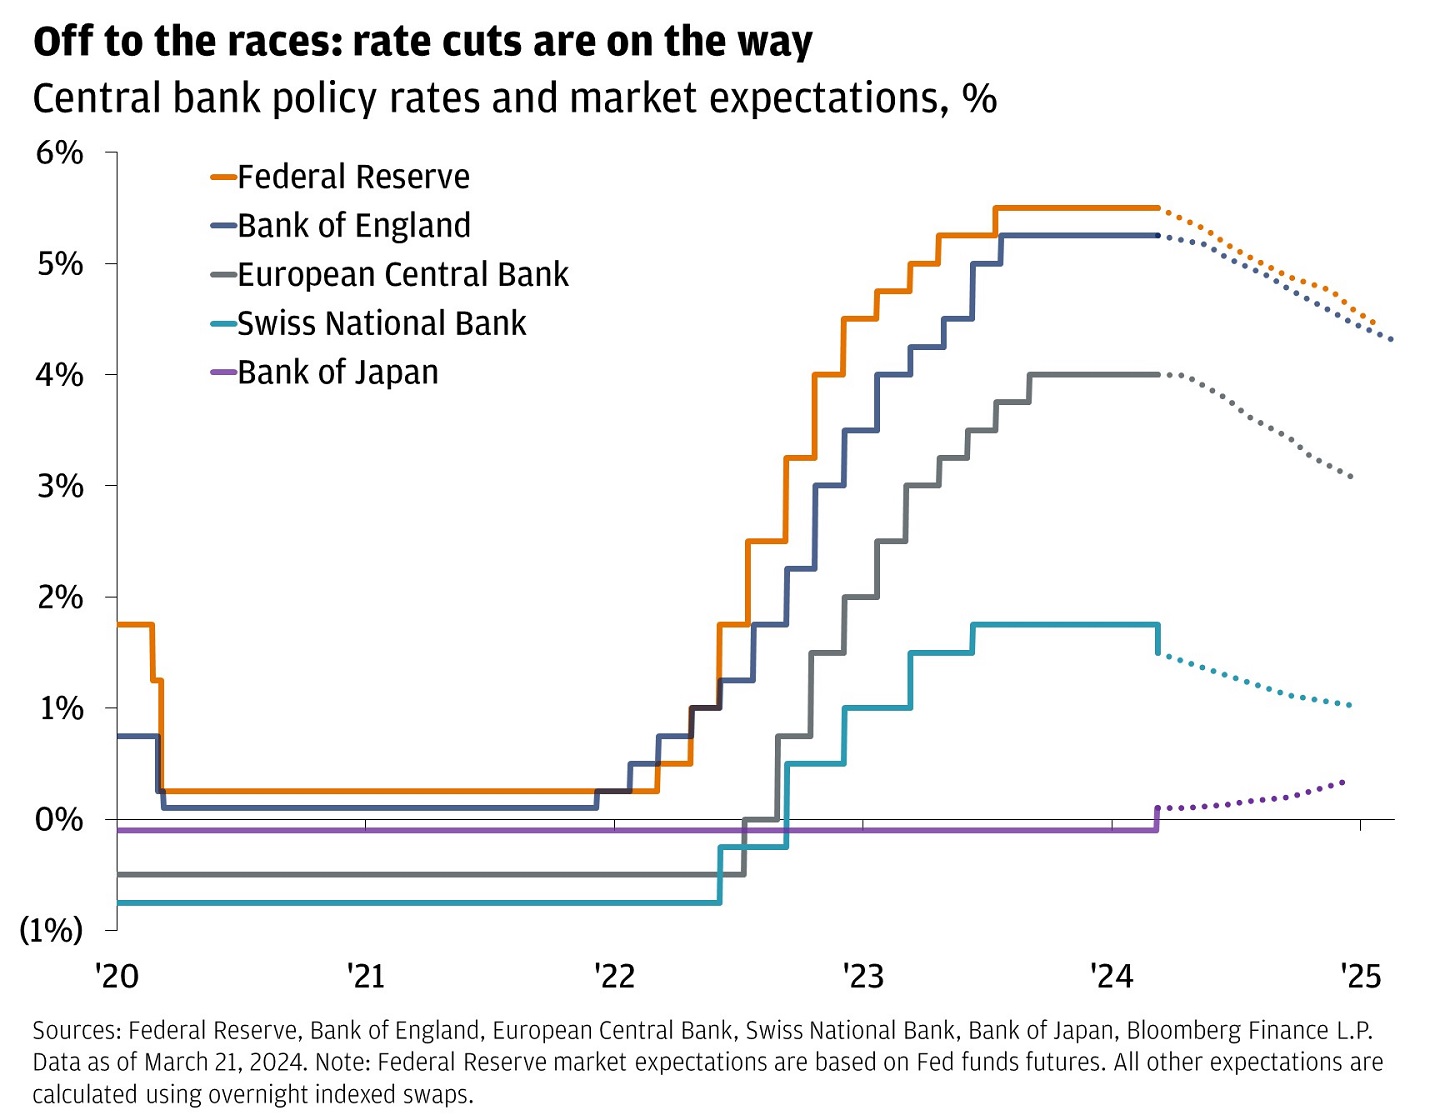 This chart shows central bank policy rates and expectations, for the Federal Reserve, Bank of England, European Central Bank, Swiss National Bank, and the Bank of Japan.